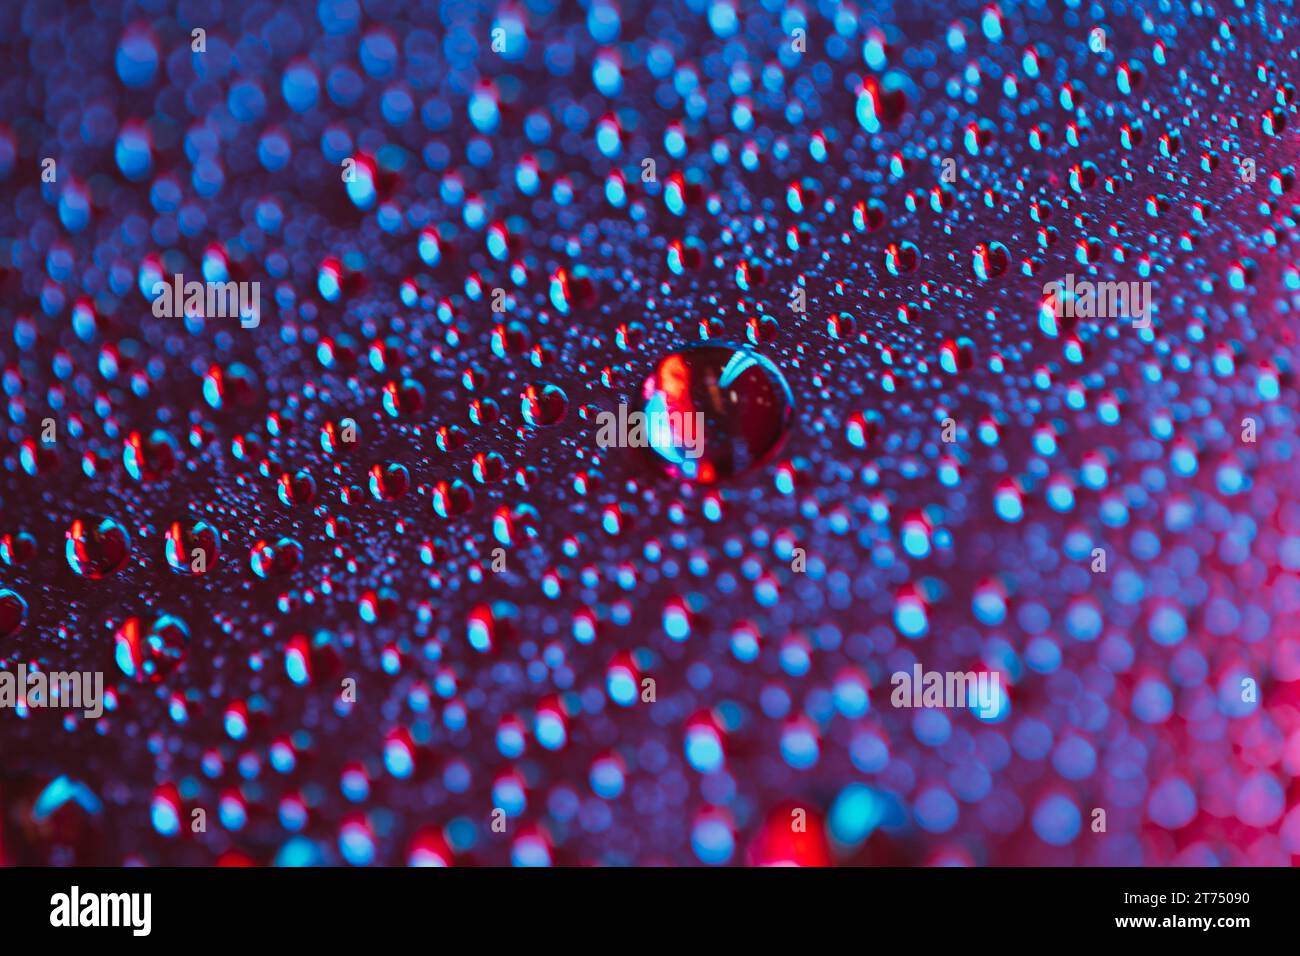 Abstract bright colored background with bubbles Stock Photo